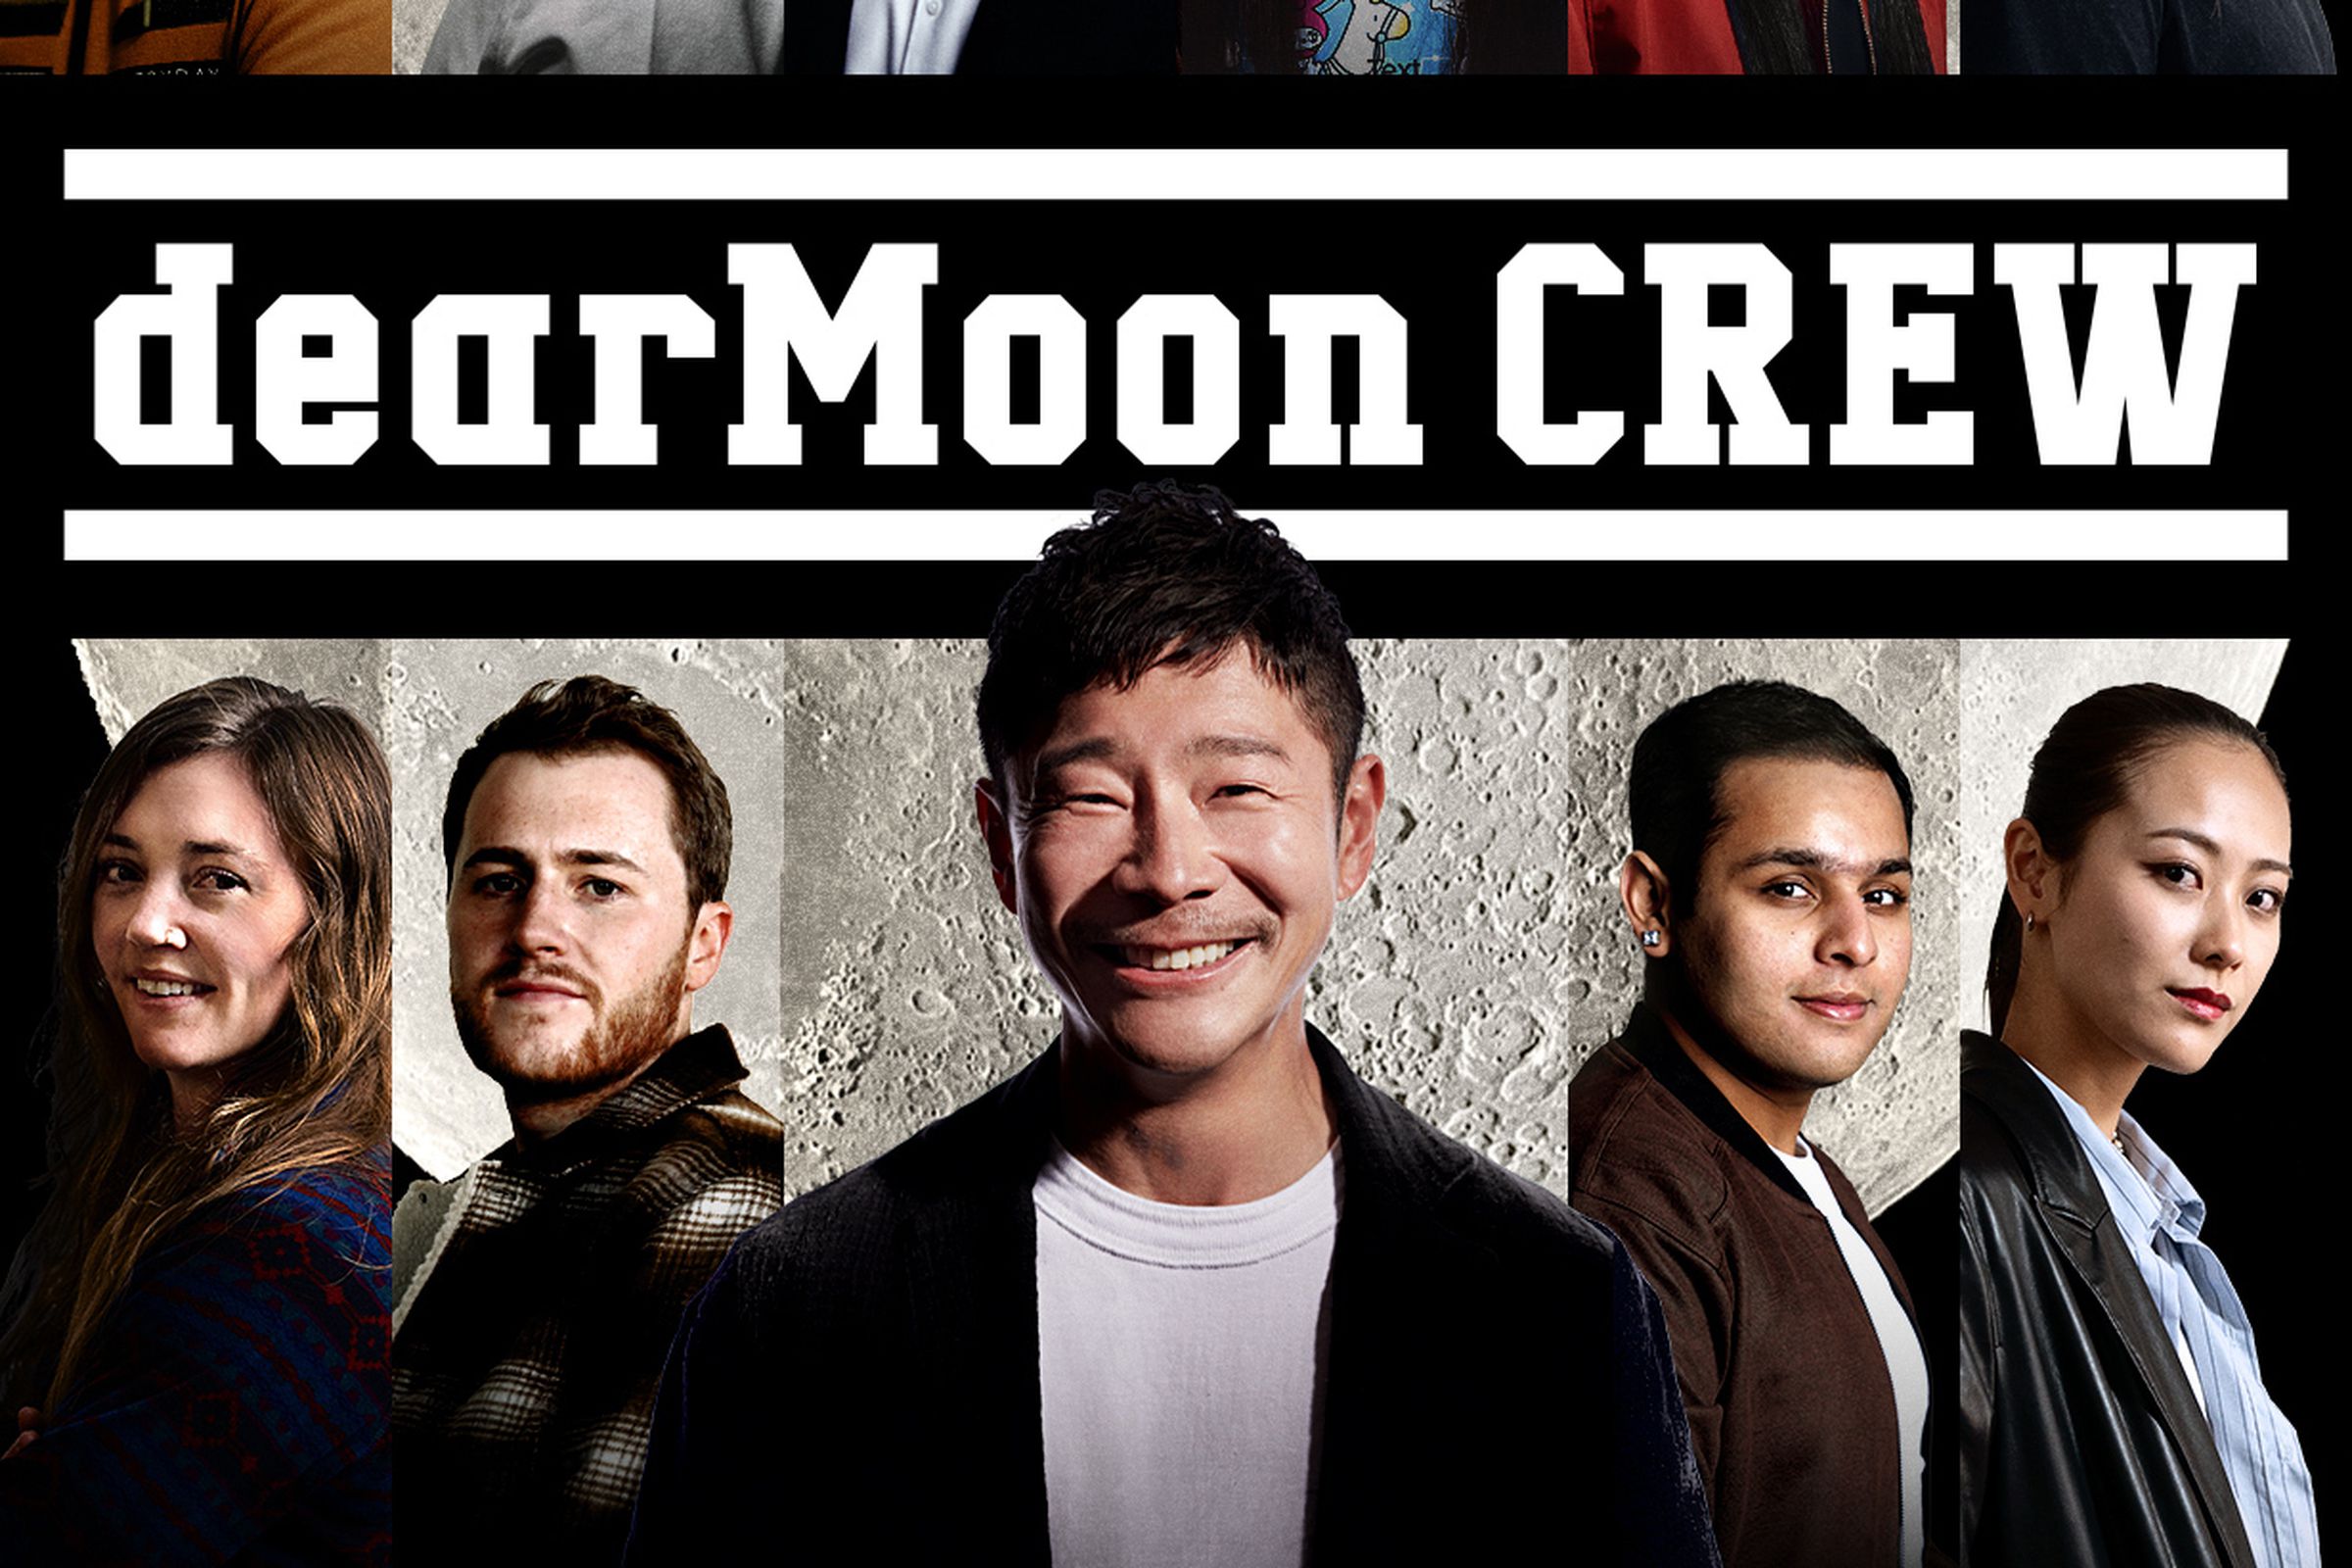 A photo illustration of the dearMoon crew and two alternates. There are six people on the top and five on the bottom. The Moon is in the background, and the words ‘dearMoon CREW’ are written across the image in white.